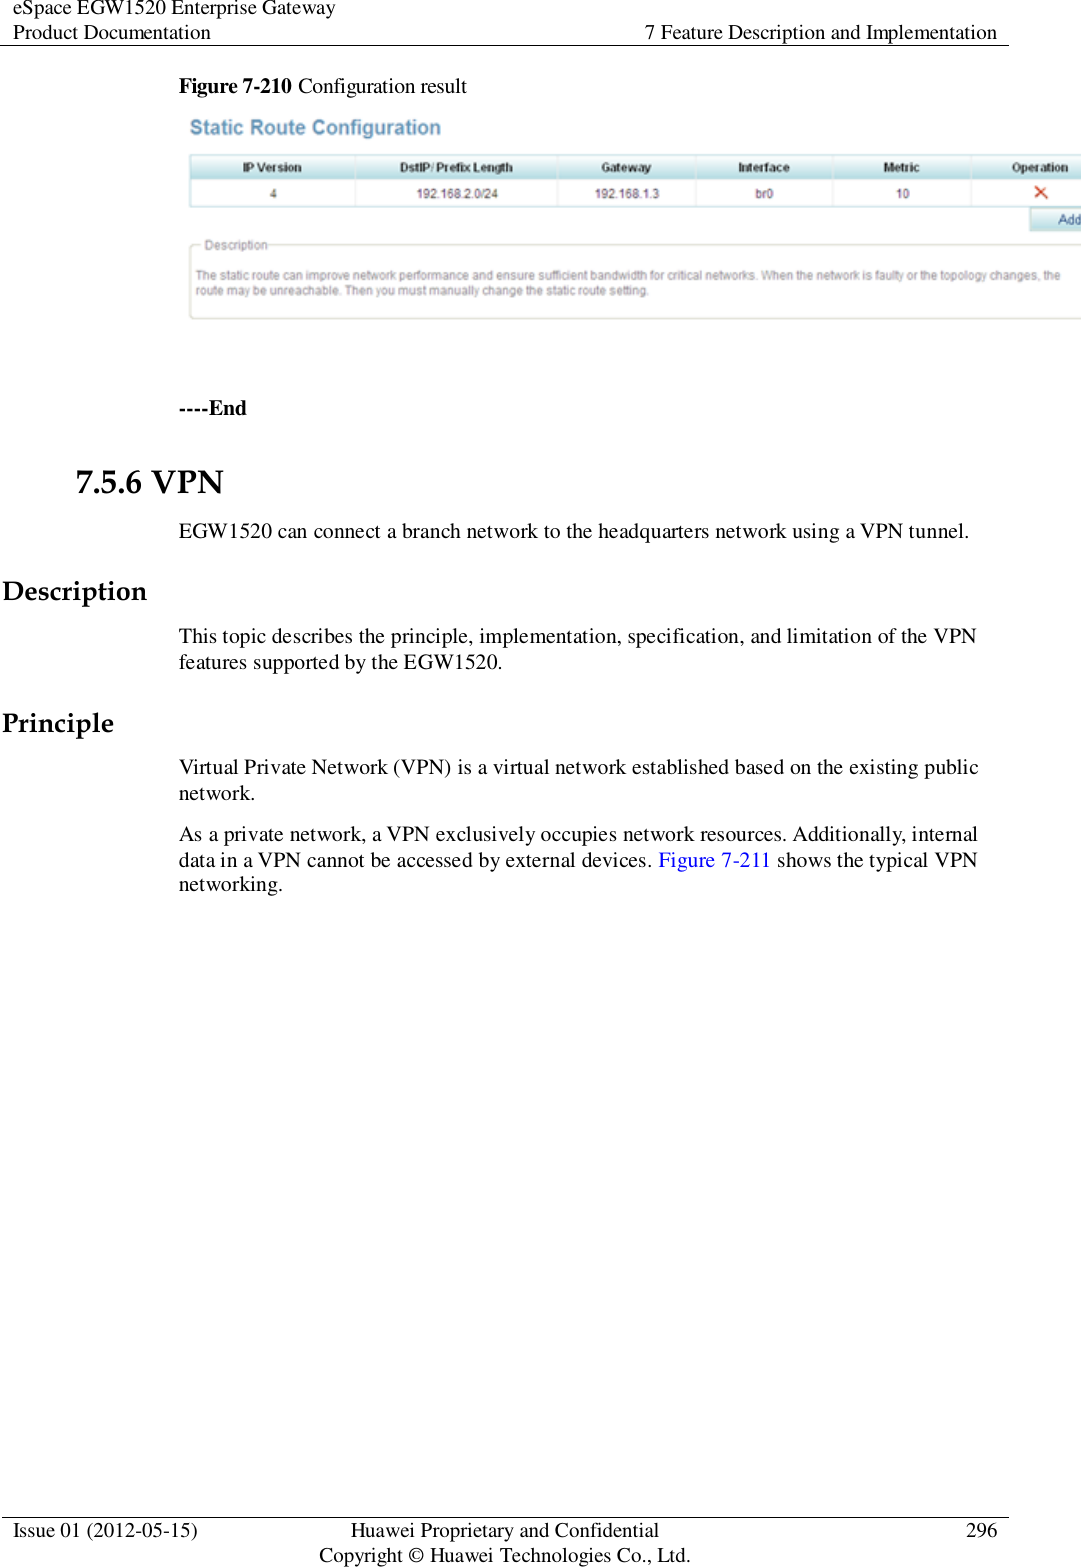 eSpace EGW1520 Enterprise Gateway Product Documentation 7 Feature Description and Implementation  Issue 01 (2012-05-15) Huawei Proprietary and Confidential                                     Copyright © Huawei Technologies Co., Ltd. 296  Figure 7-210 Configuration result   ----End 7.5.6 VPN EGW1520 can connect a branch network to the headquarters network using a VPN tunnel. Description This topic describes the principle, implementation, specification, and limitation of the VPN features supported by the EGW1520. Principle Virtual Private Network (VPN) is a virtual network established based on the existing public network.   As a private network, a VPN exclusively occupies network resources. Additionally, internal data in a VPN cannot be accessed by external devices. Figure 7-211 shows the typical VPN networking. 